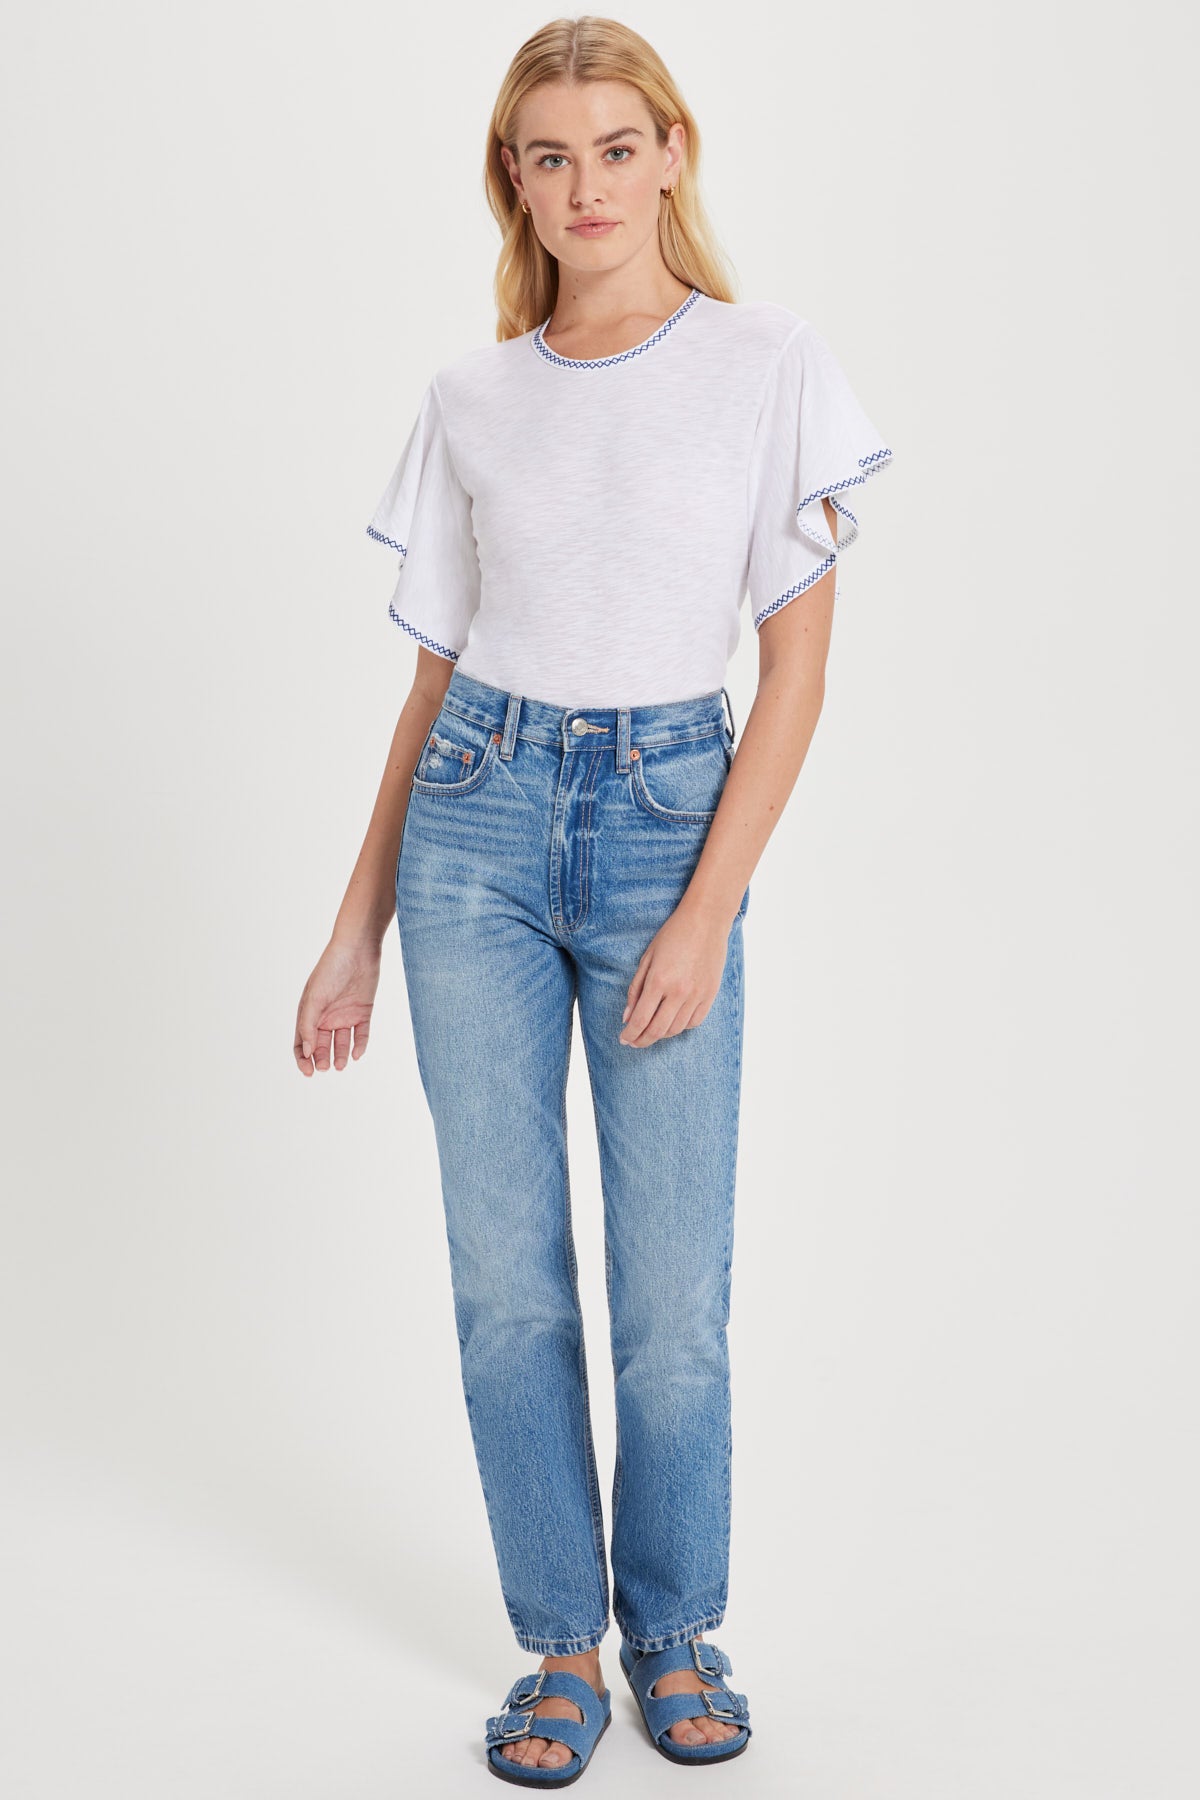 Celeste Embroidered Ruffle Top